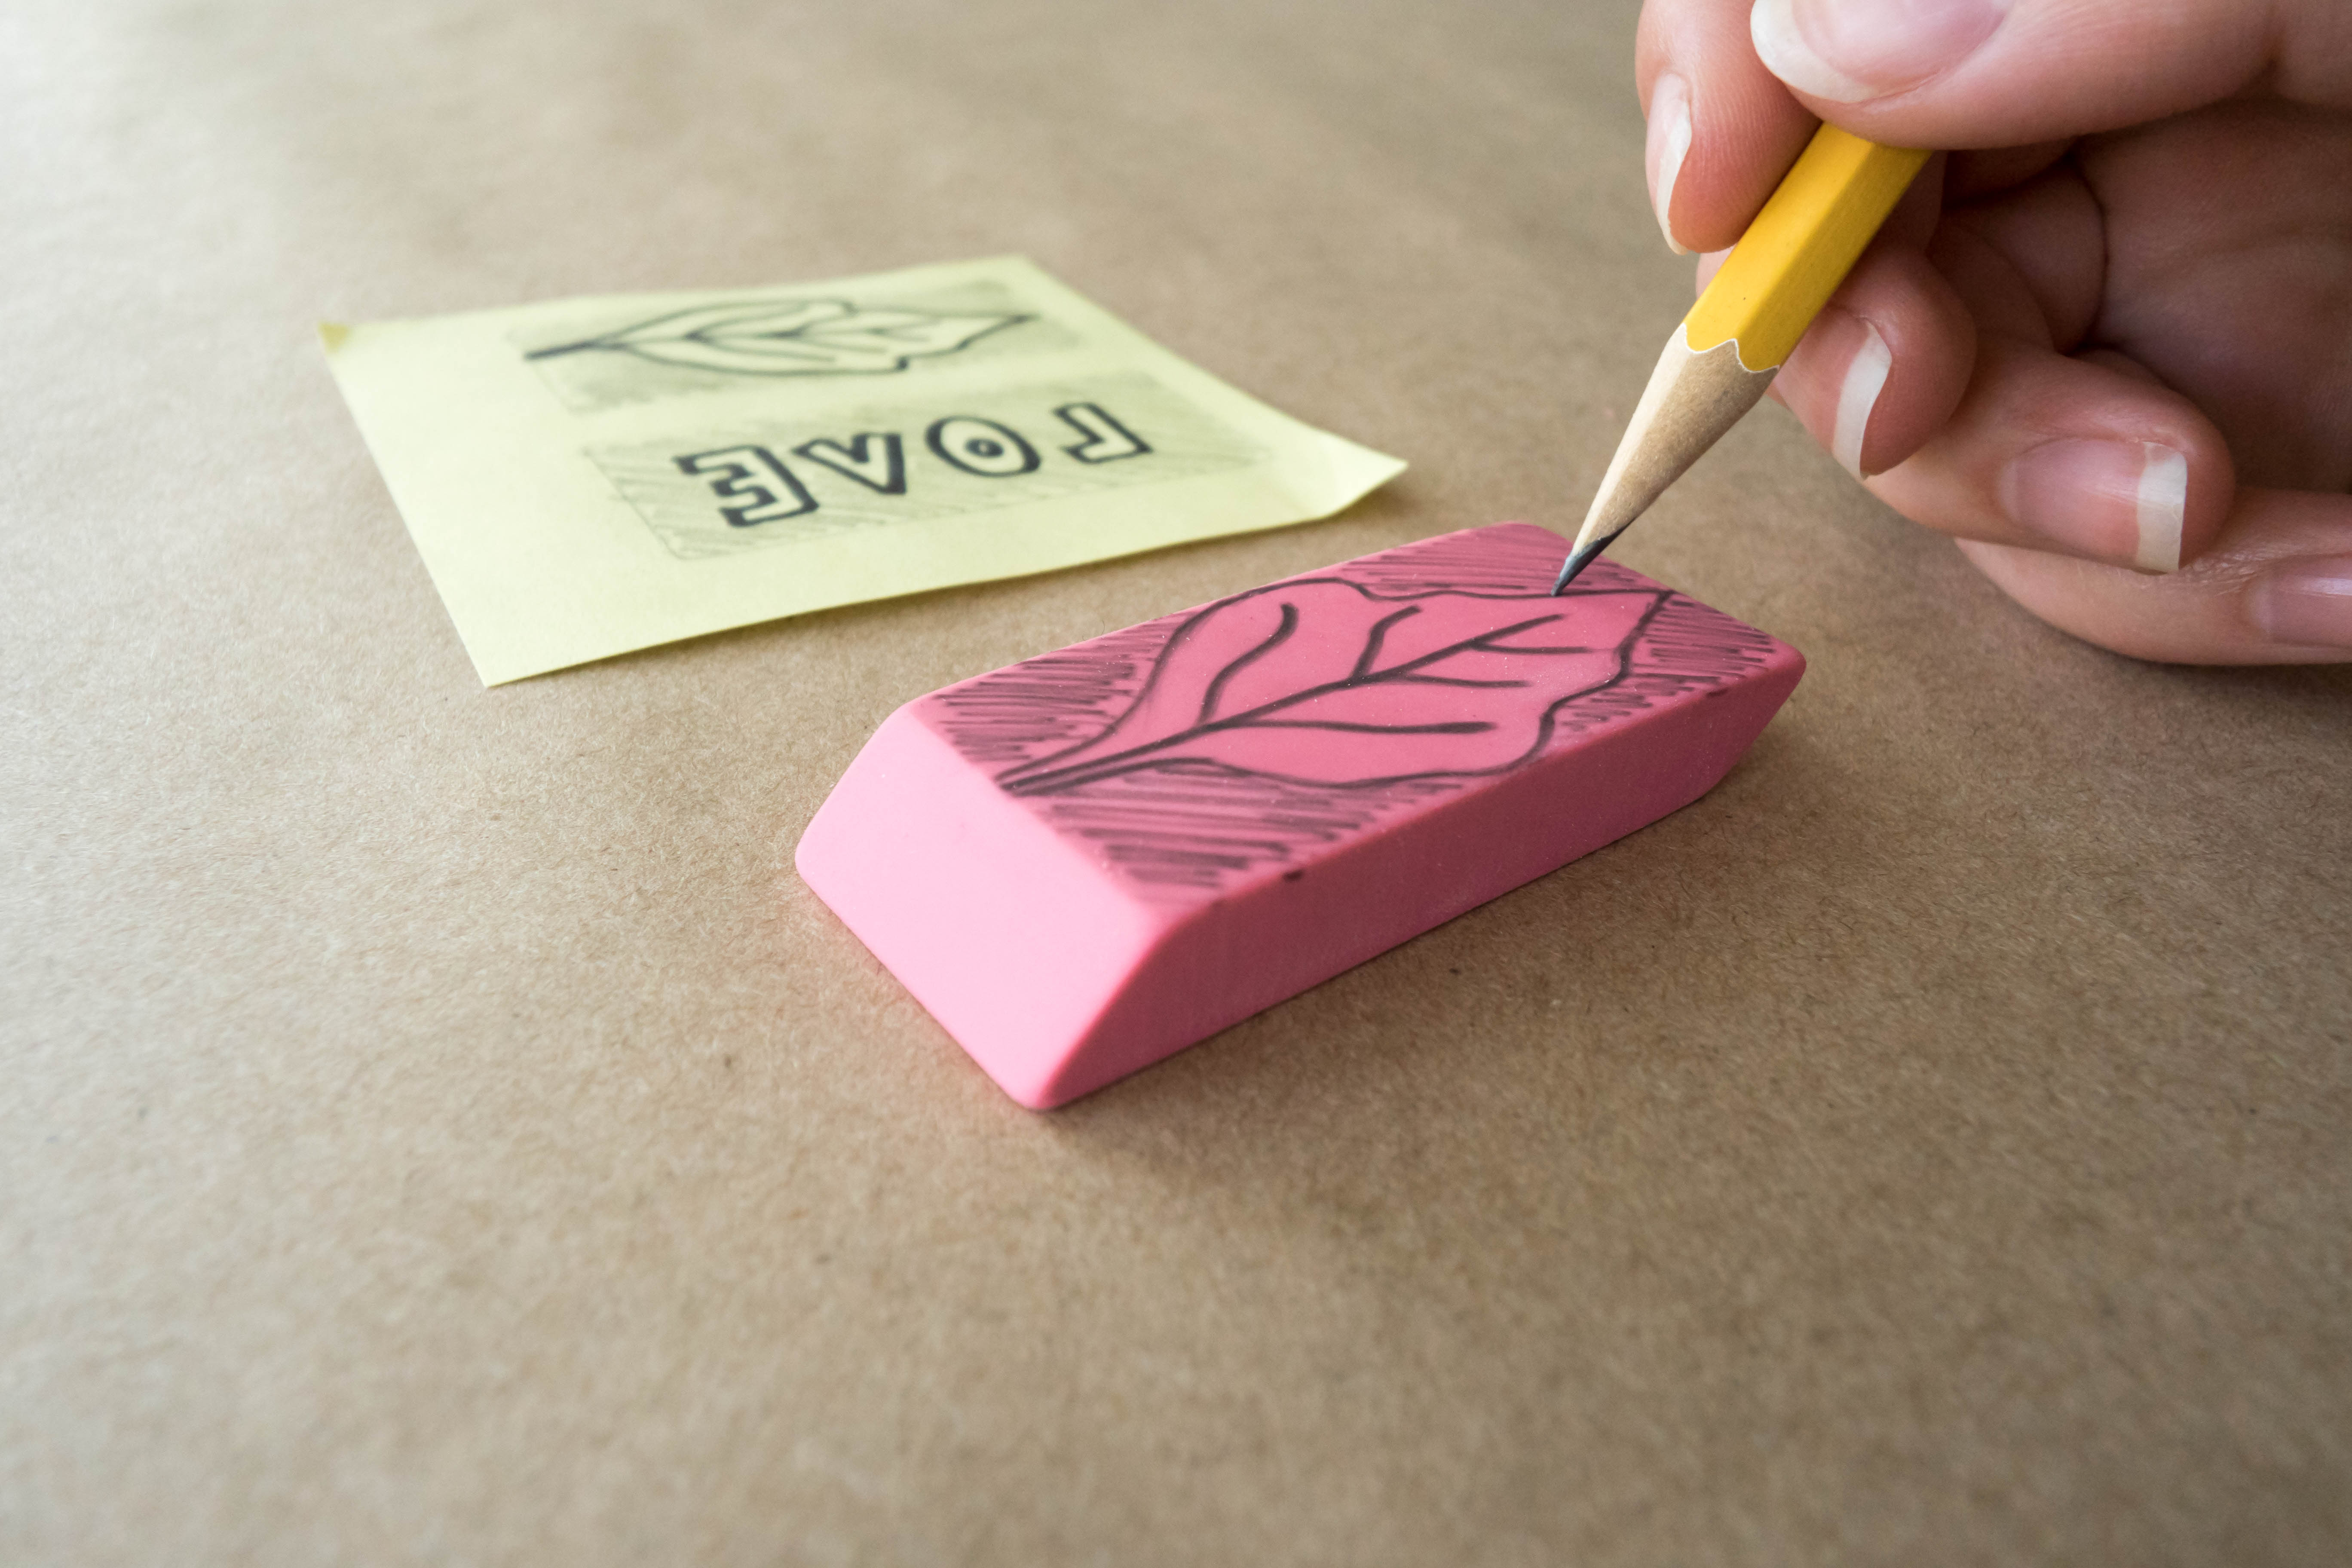 Rubber Stamps: How to Carve & Print, Step by Step for Beginner Artists 